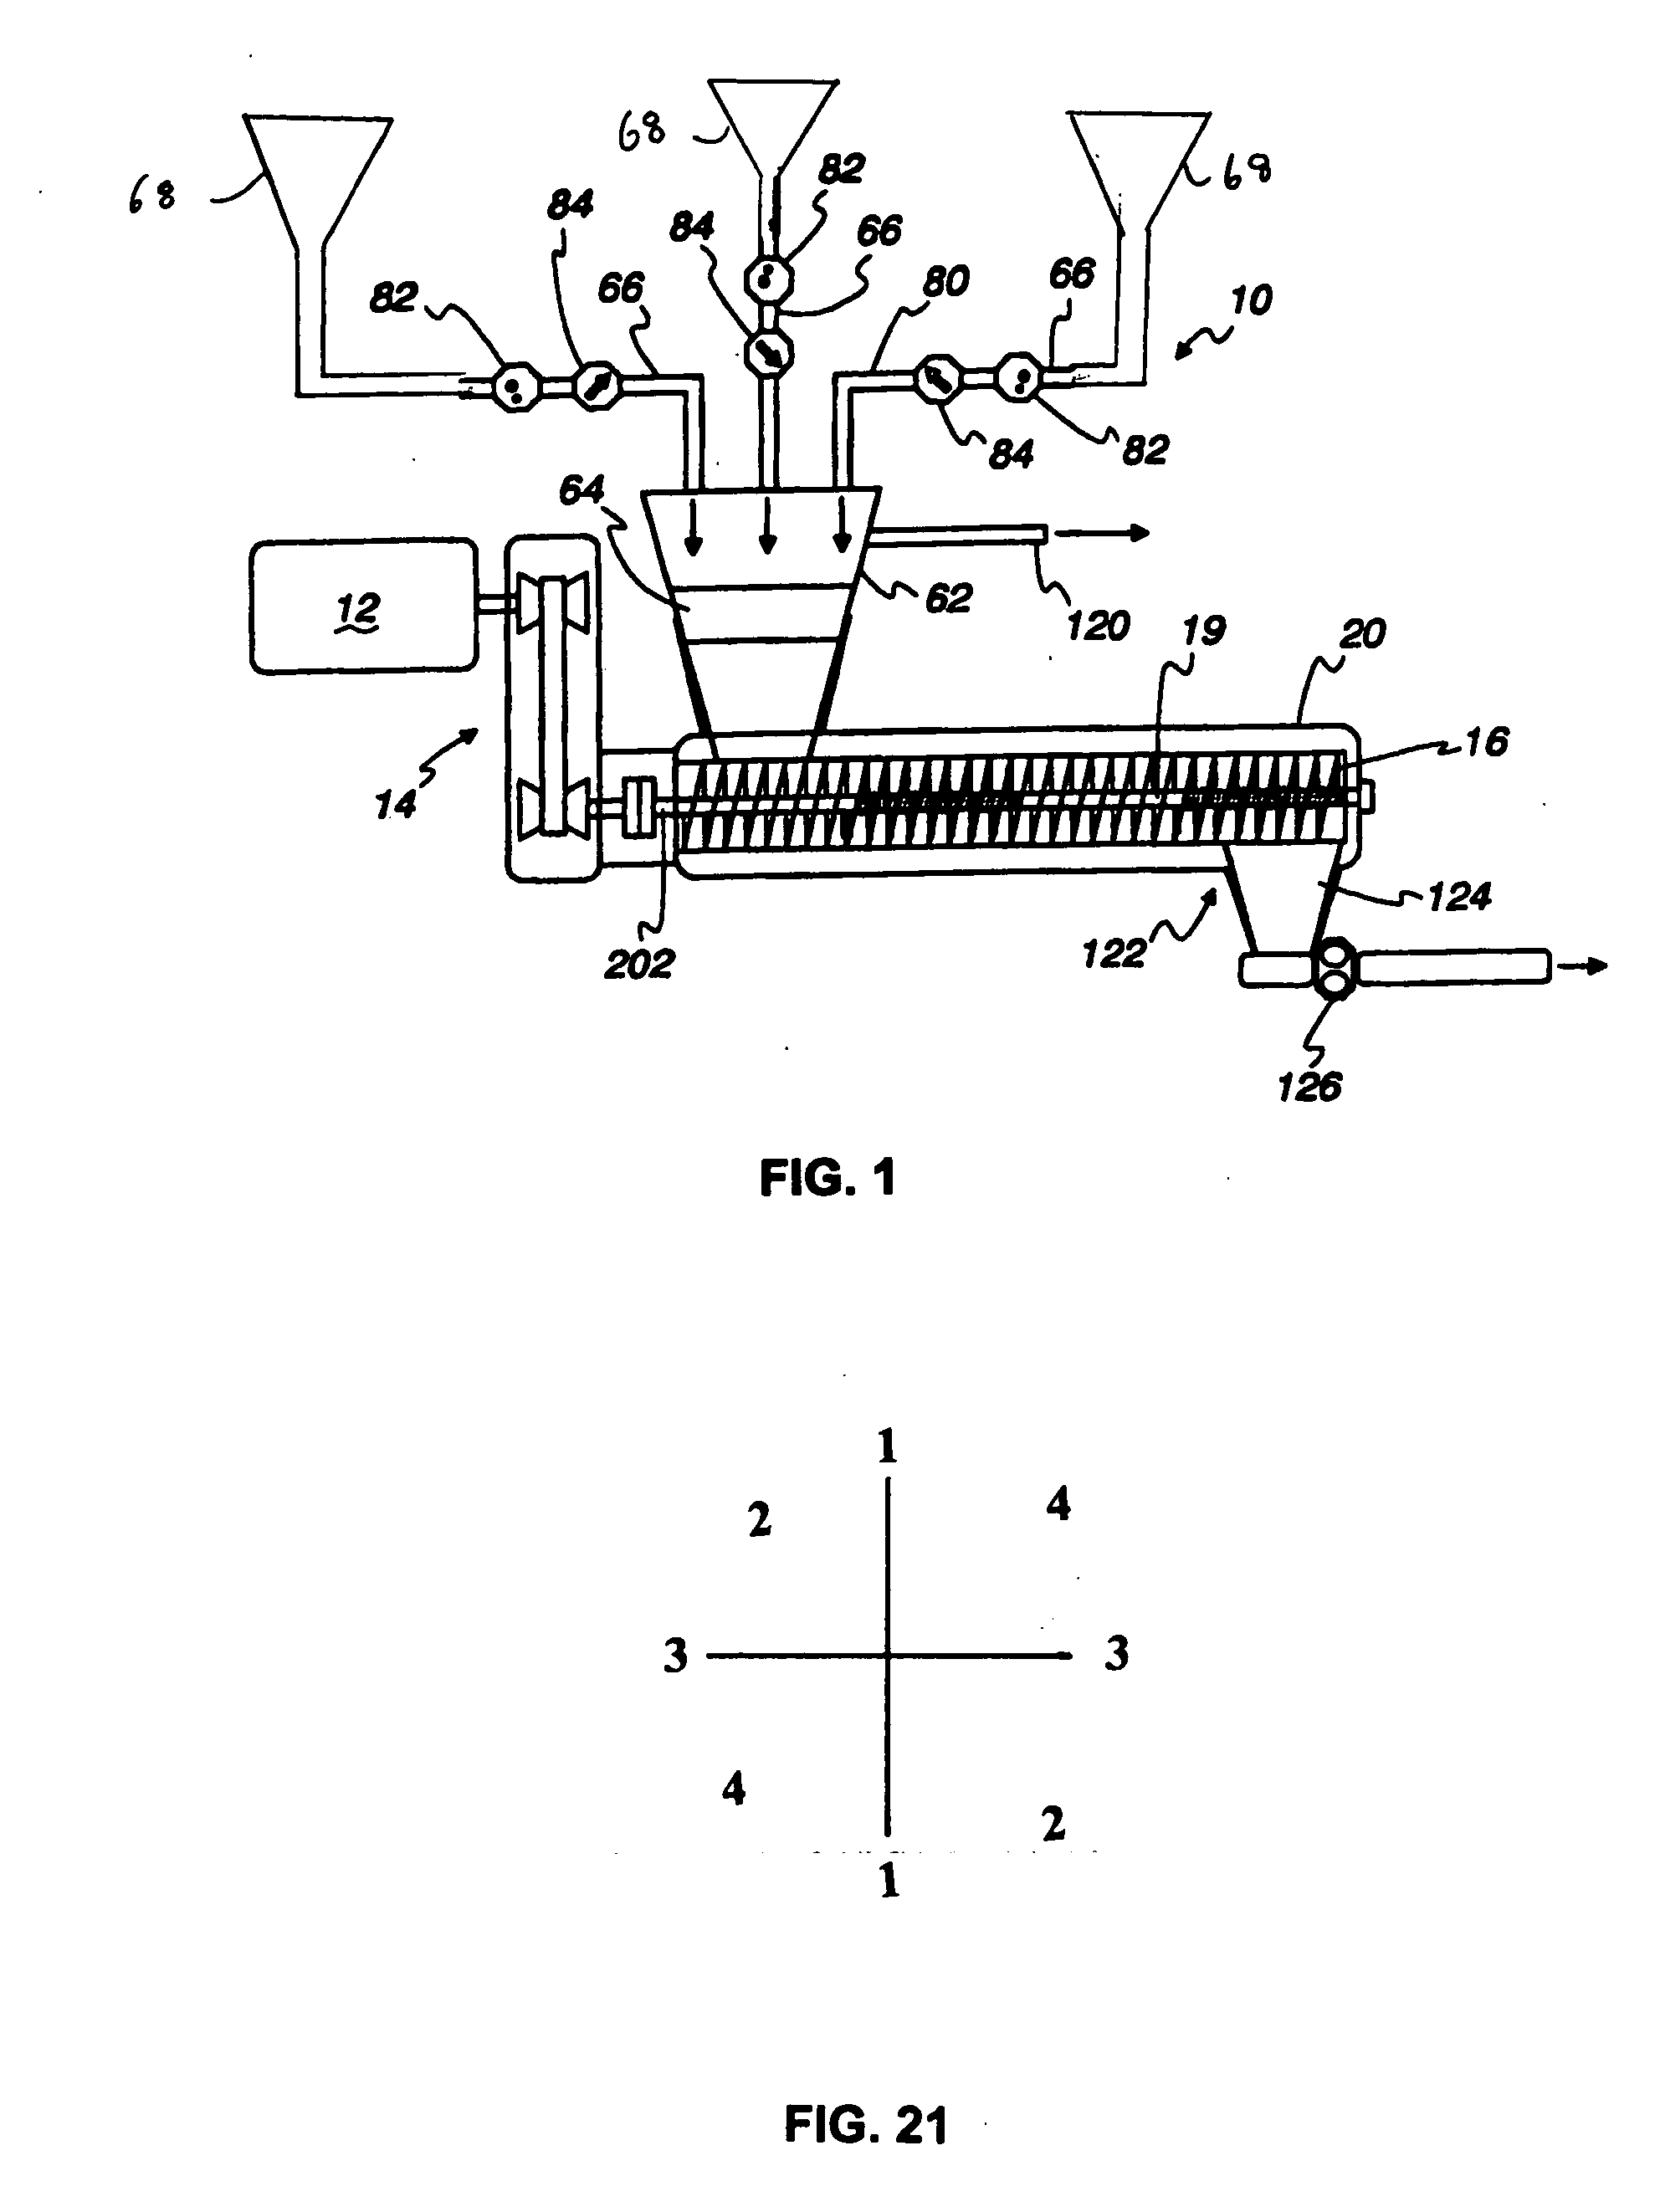 Method and apparatus for compostion control for processing meat